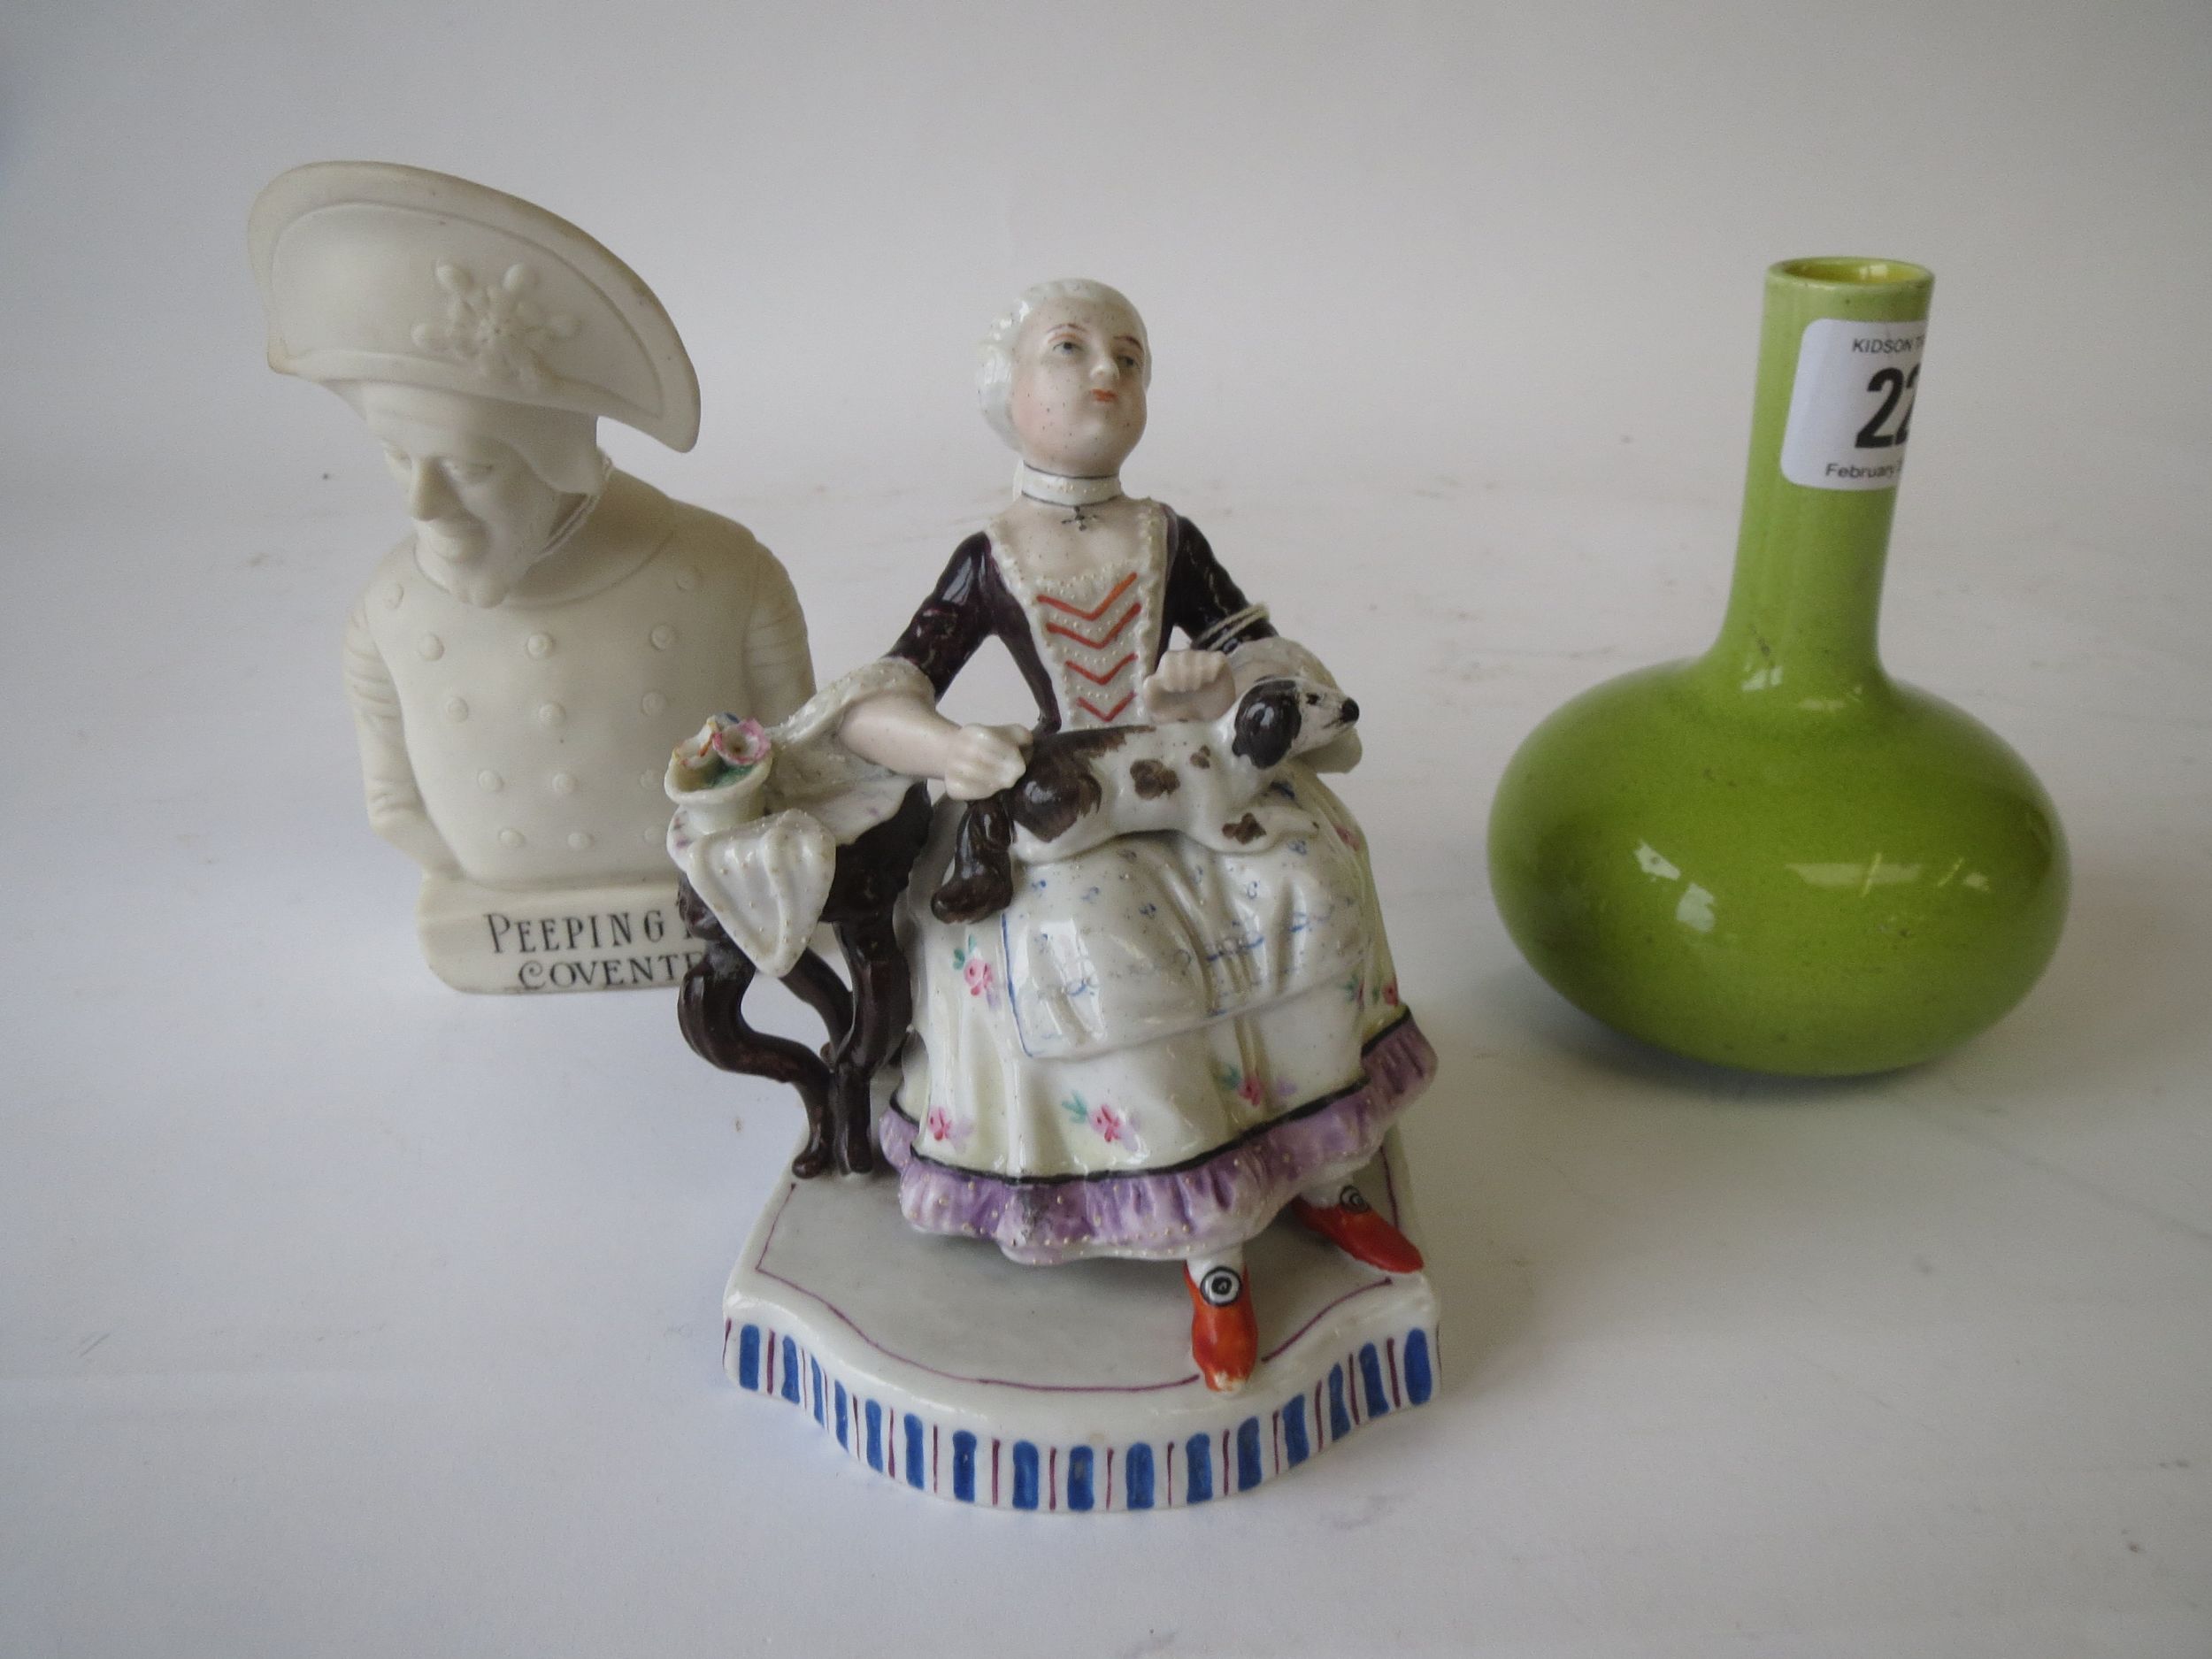 Victorian parlour figure, small green vase and Staffordshire Peeping Tom bust Condition: minor